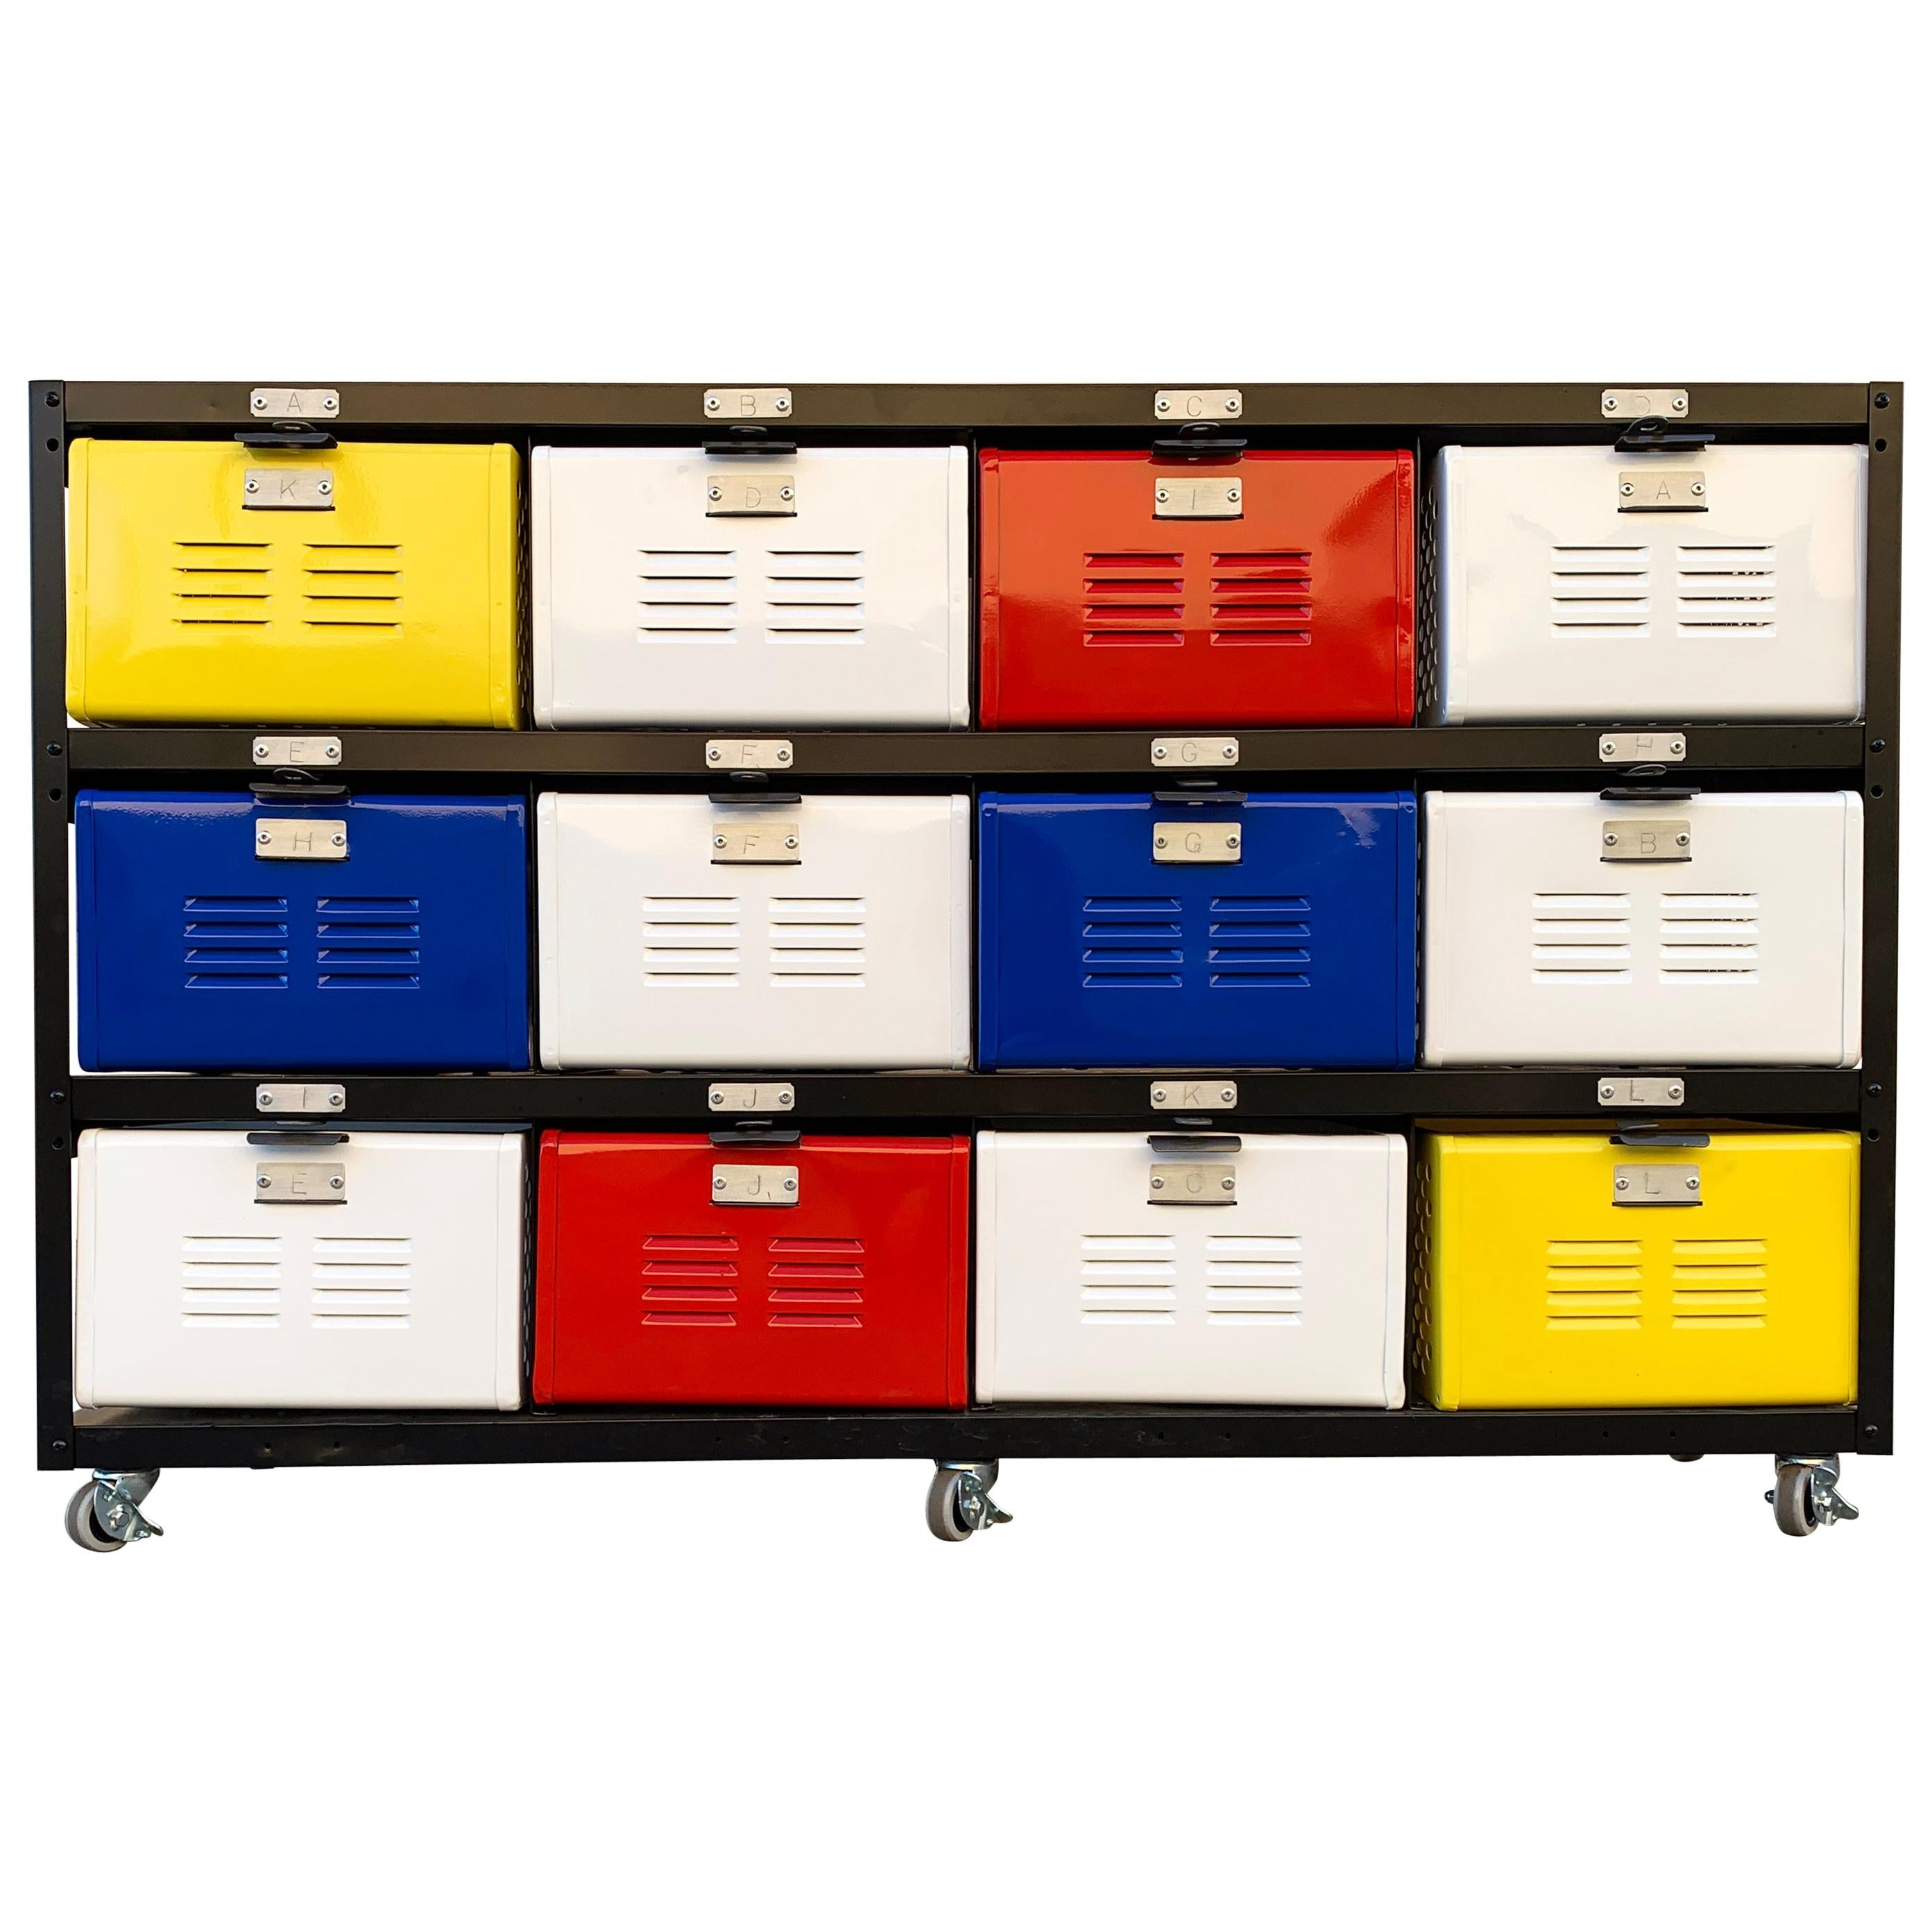 Custom Made 4 X 3 Locker Basket Unit on Casters with Multicolored Drawers For Sale